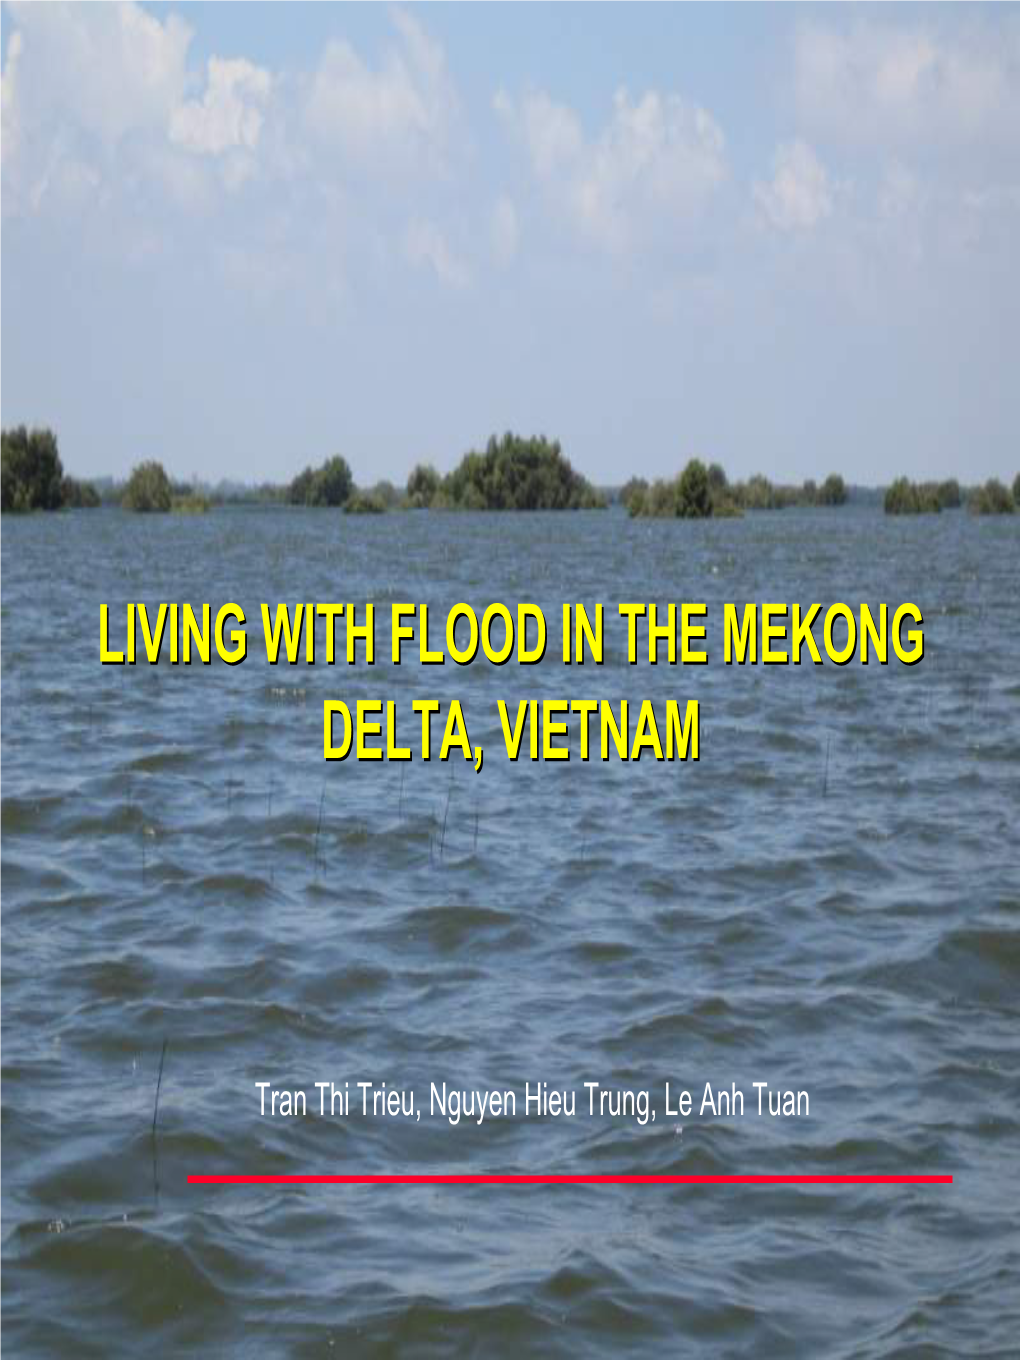 Living with Flood in the Mekong Delta, Vietnam